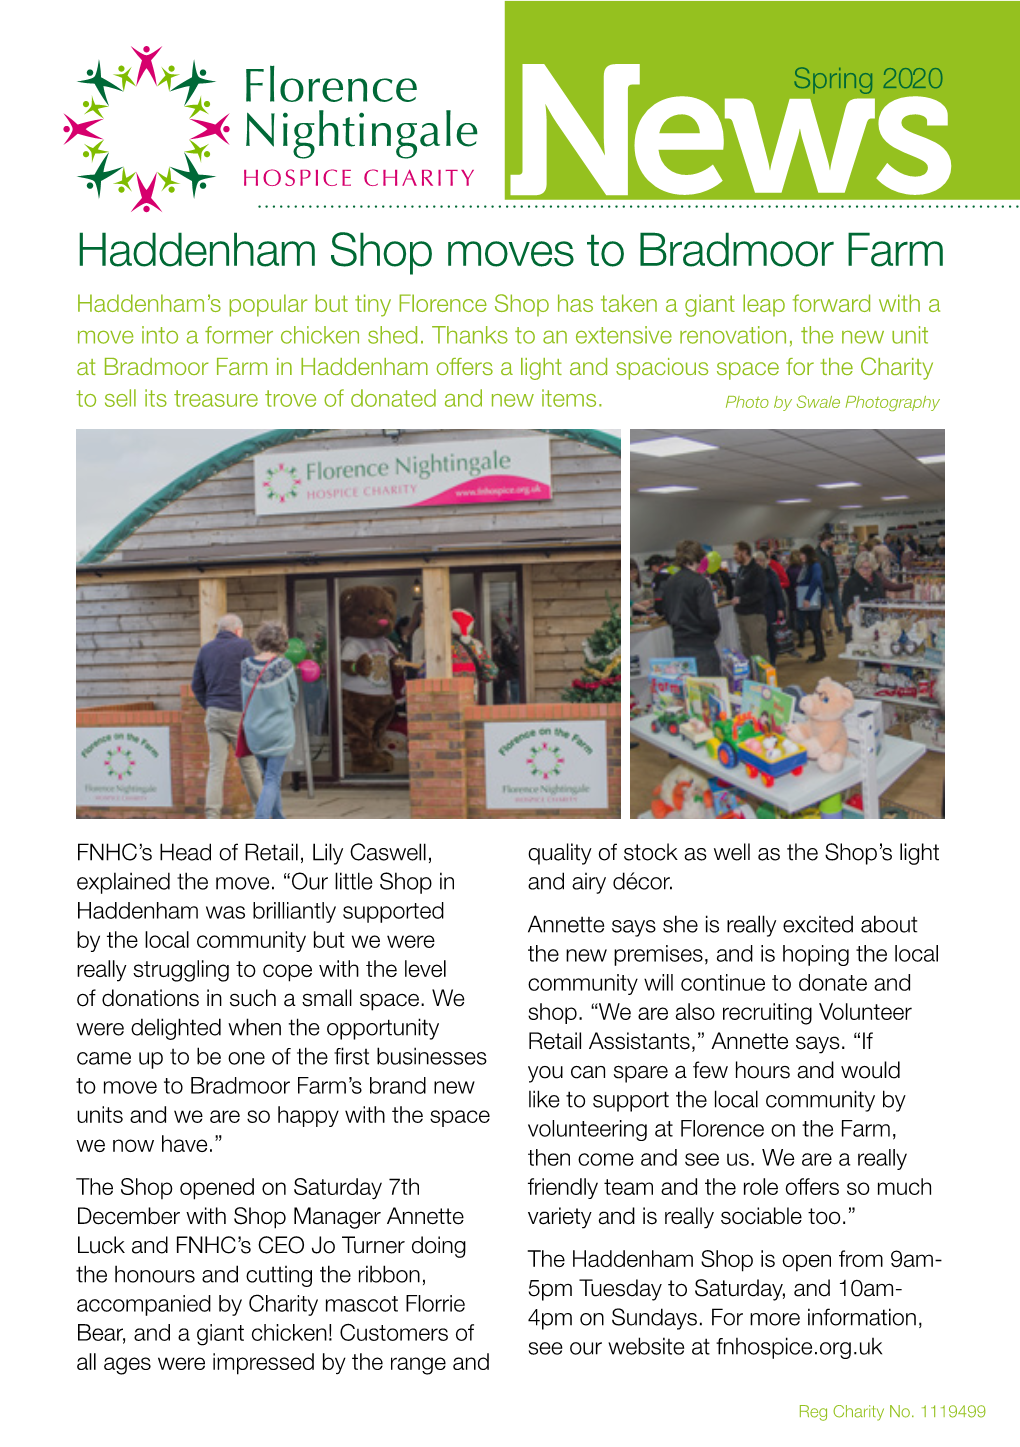 Haddenham Shop Moves to Bradmoor Farm Haddenham’S Popular but Tiny Florence Shop Has Taken a Giant Leap Forward with a Move Into a Former Chicken Shed